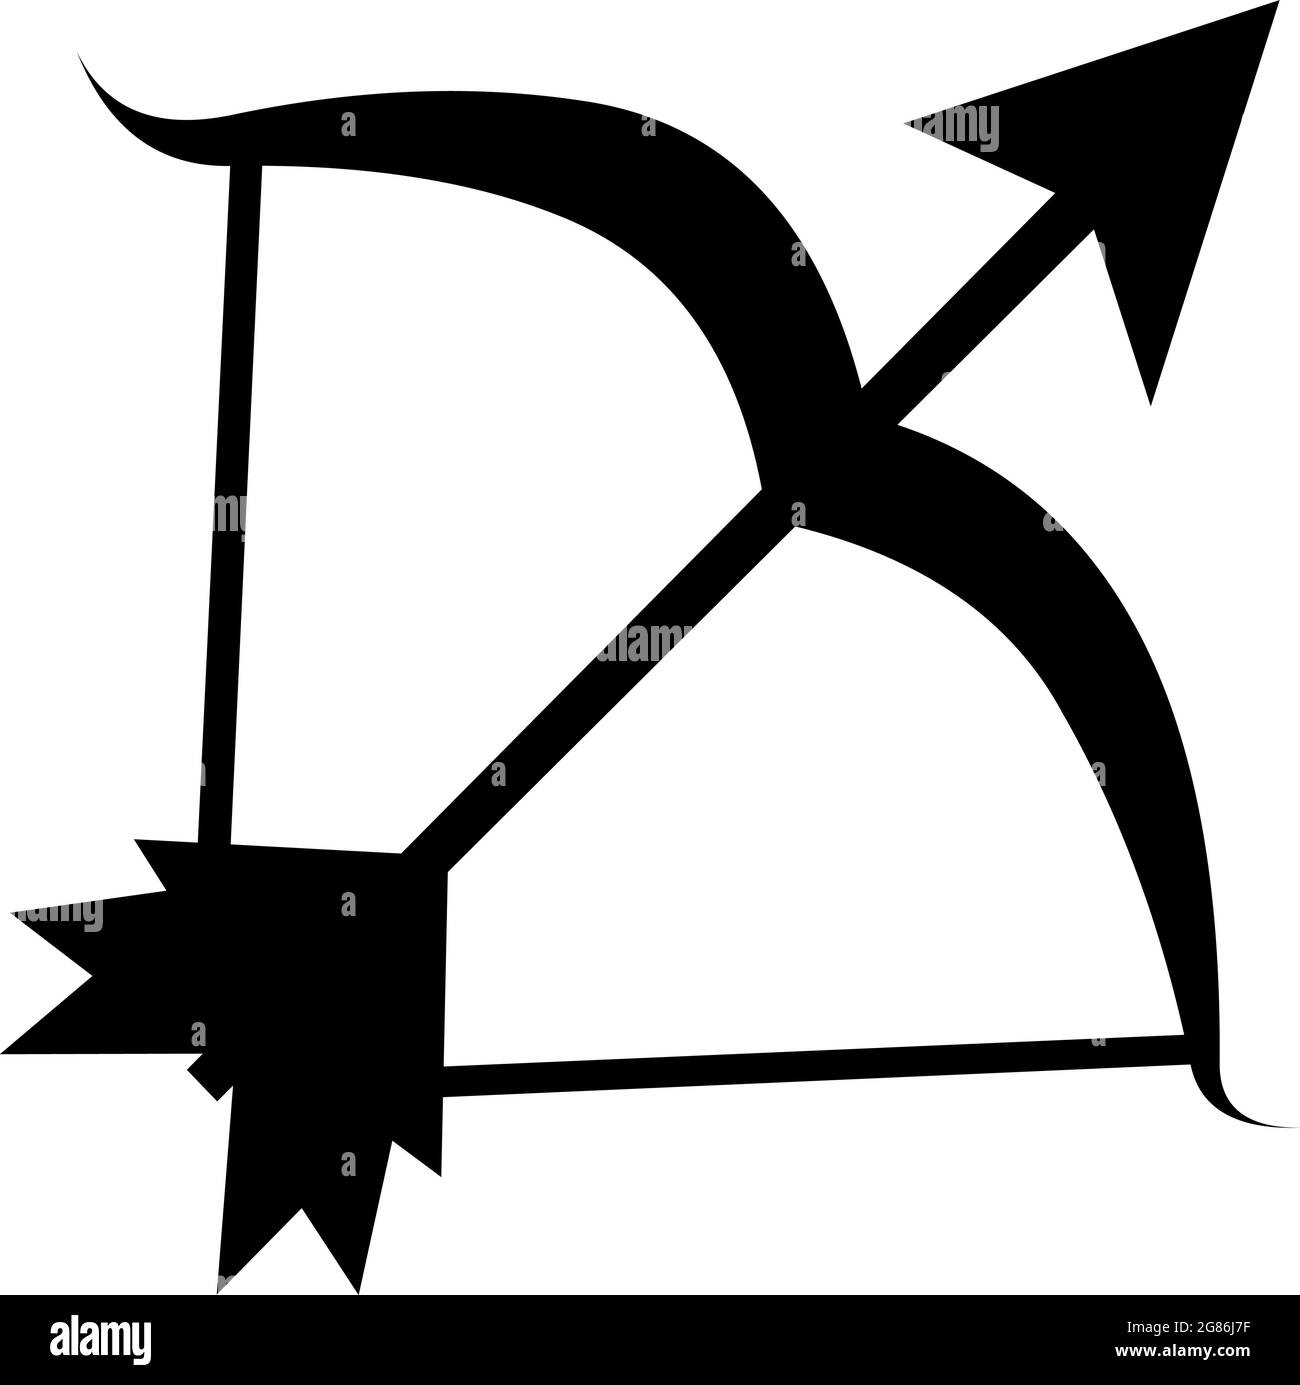 Vector illustration of black silhouette of a bow and arrow Stock Vector